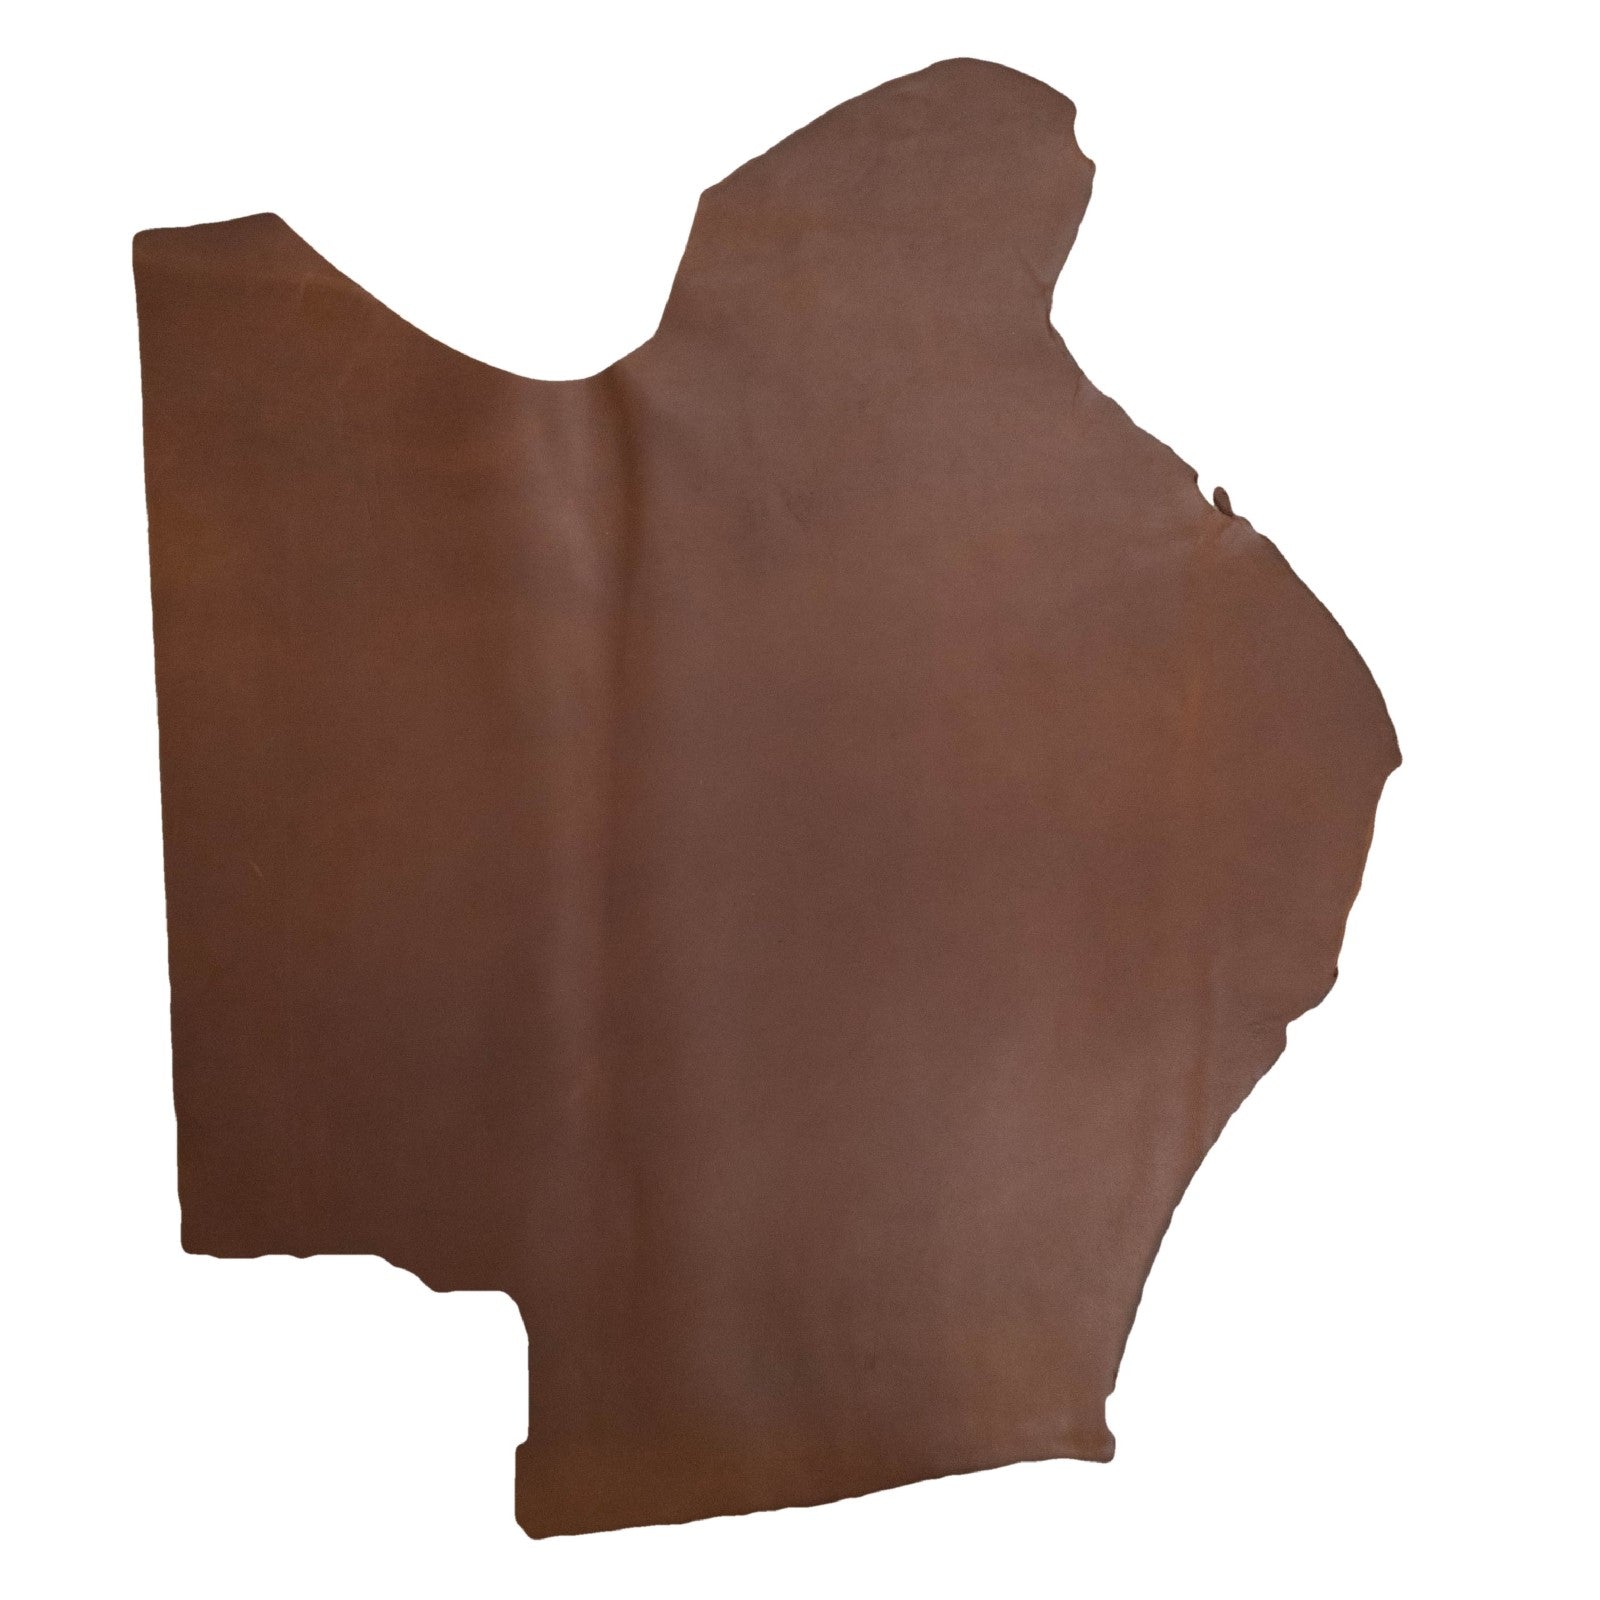 Browns, 4-6 oz, 4-9 Sq Ft, Oil Tan Project Pieces,  | The Leather Guy